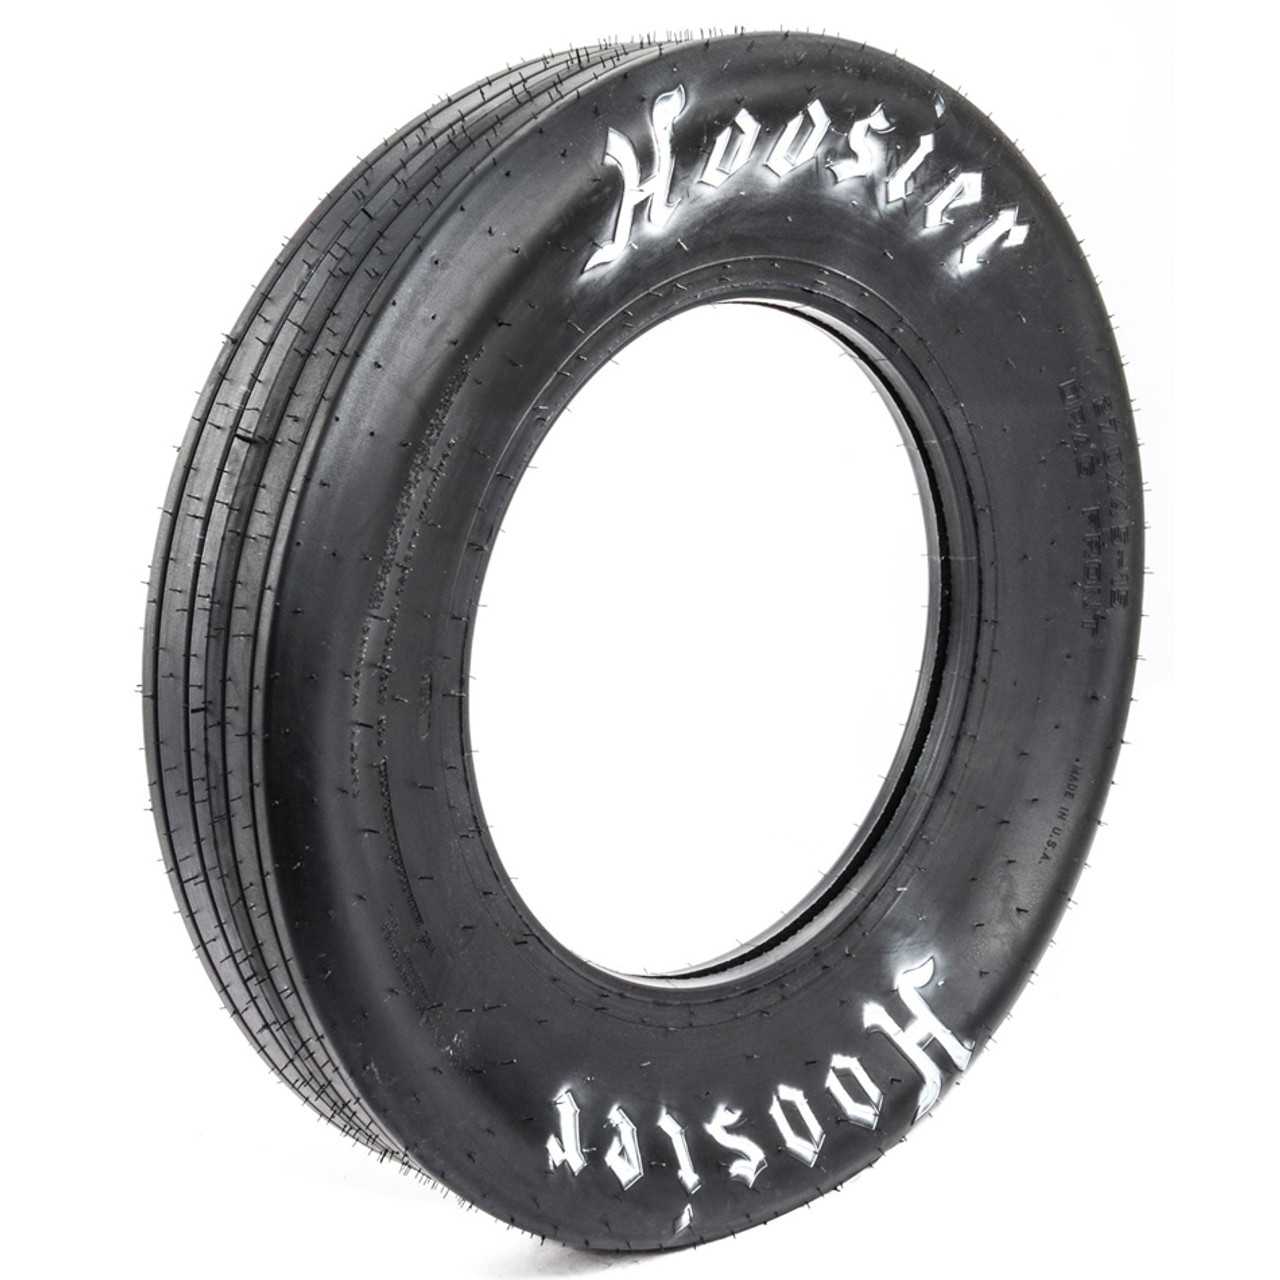 27.5/4.5-17 Front Tire